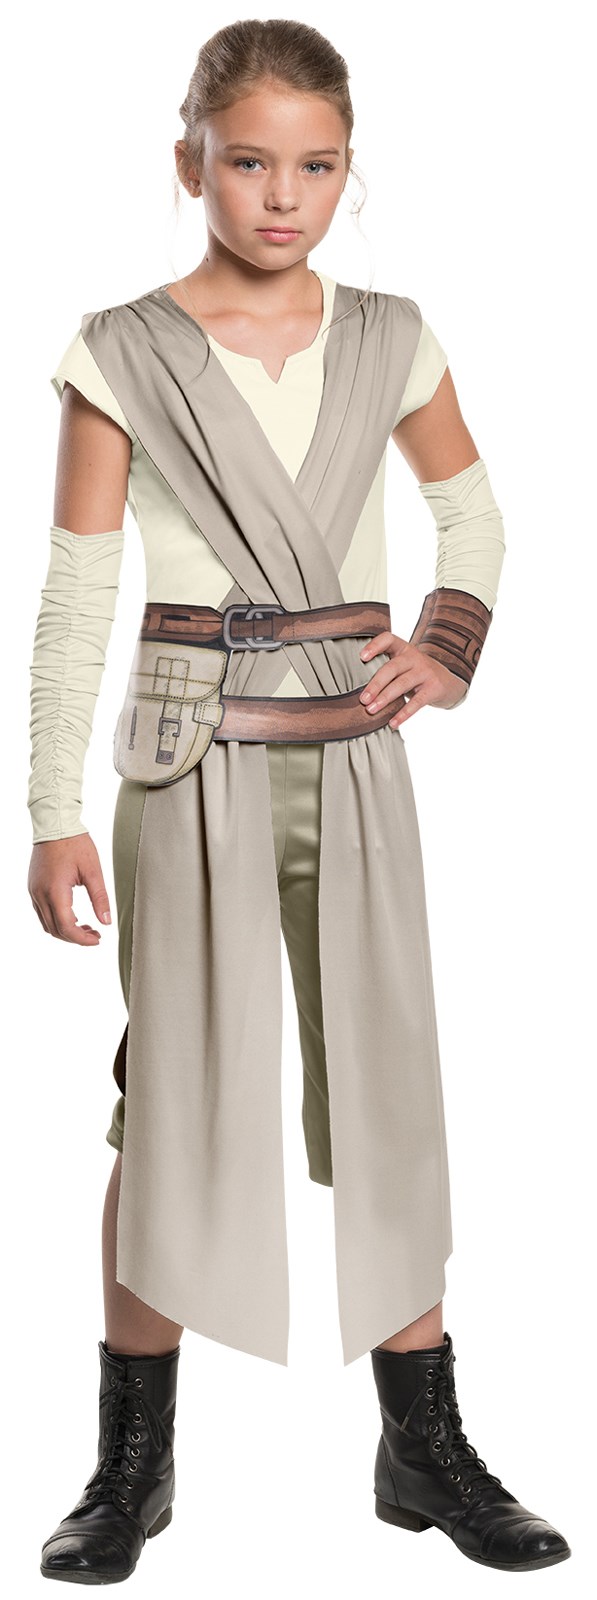 Star Wars:  The Force Awakens - Classic Rey Costume For Girls